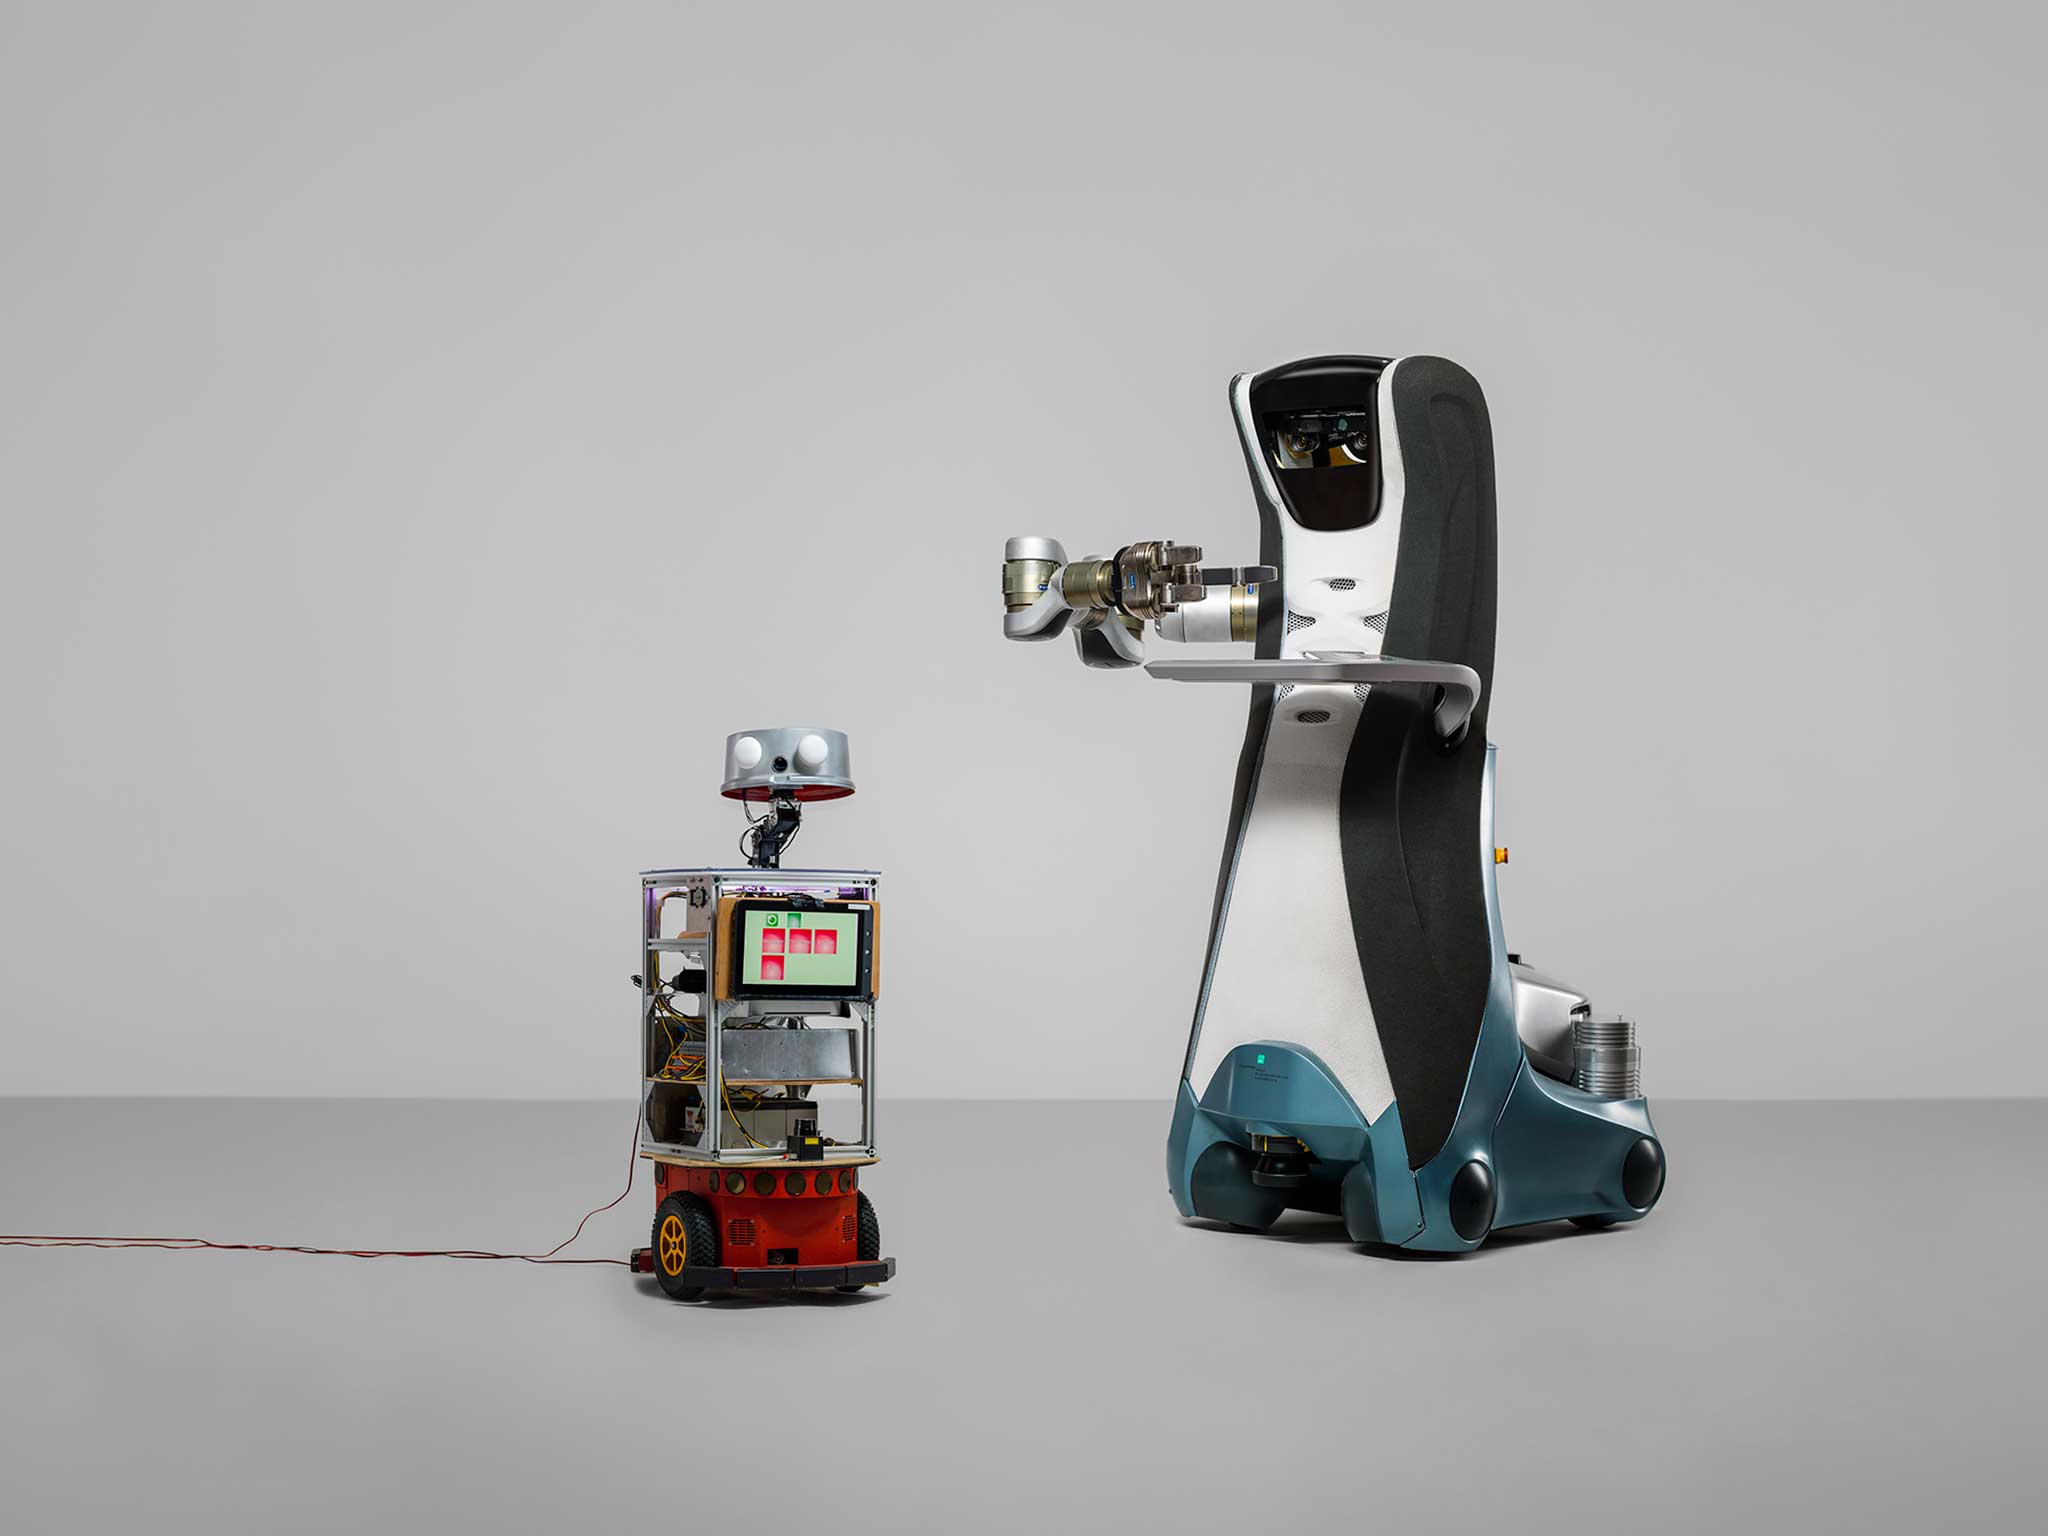 Care-O-bot (right) can respond to spoken commands and speak themselves